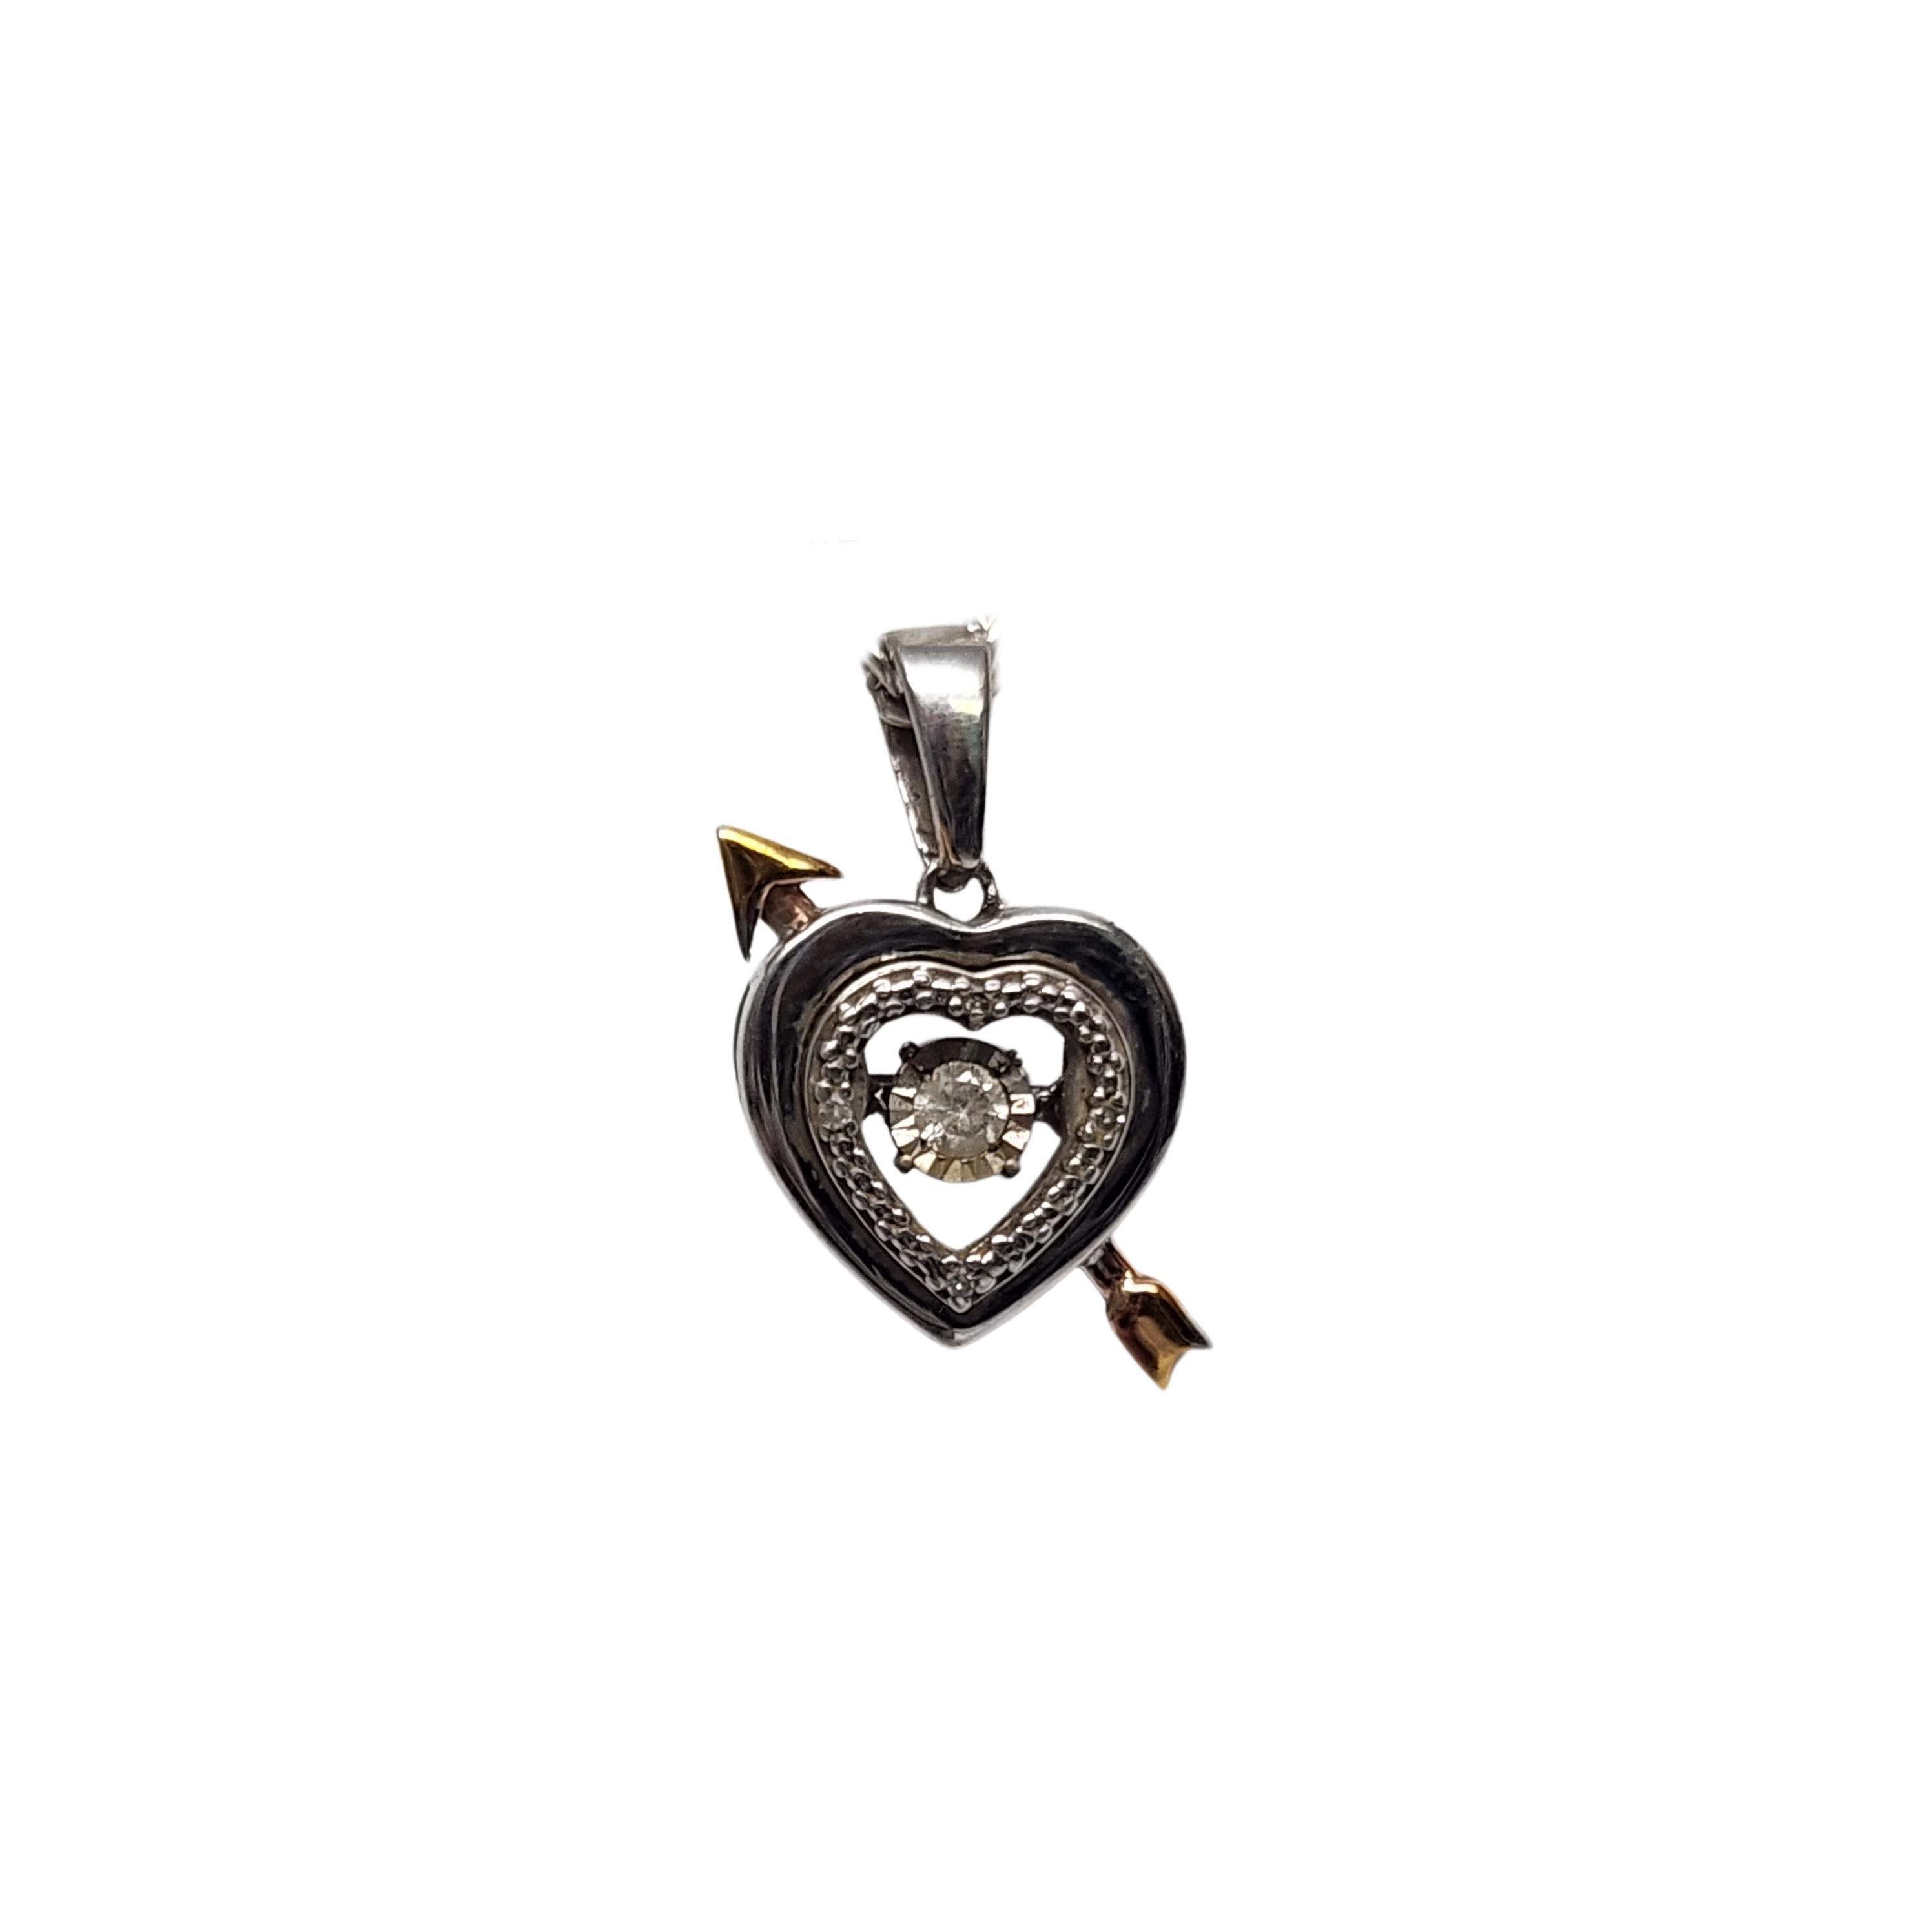 Sterling silver and diamond Unstoppable Love heart and arrow pendant by Zales.

Small open heart,14K gold plated arrow, small round diamond at the center. The diamond looks suspended and moves back and forth.

Weighs approx 1.4g, 0.9dwt

Measures